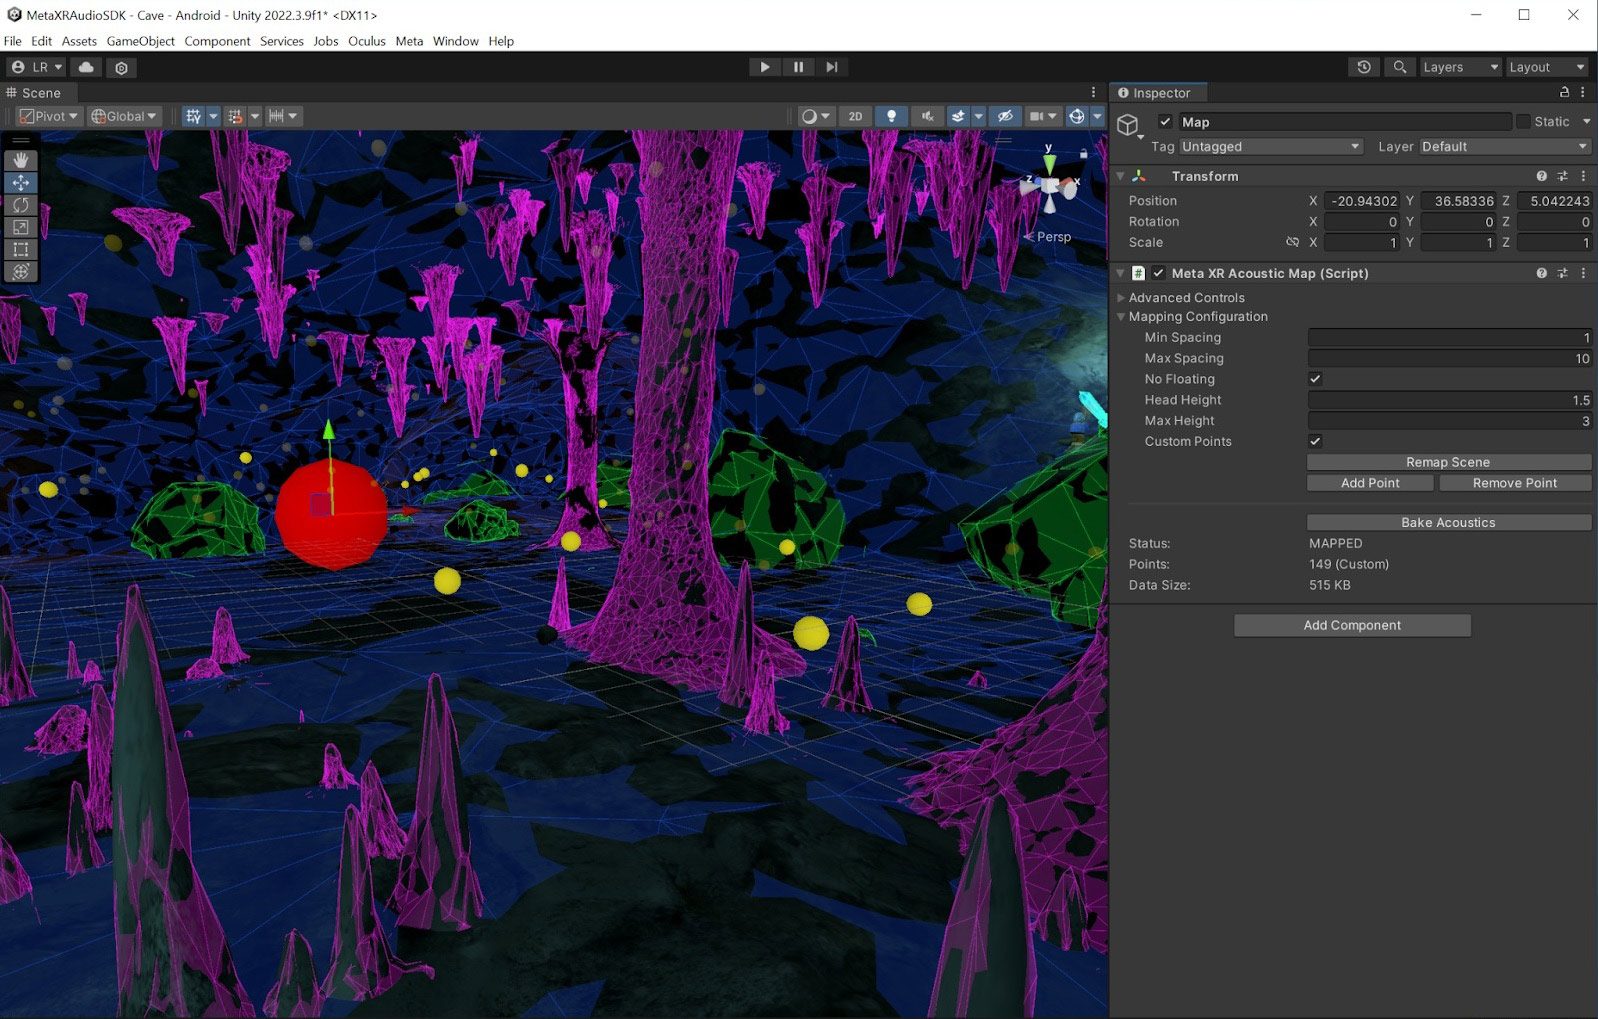 Meta Releases New Audio Ray Tracing Tool for More Immersive Soundscapes on Quest